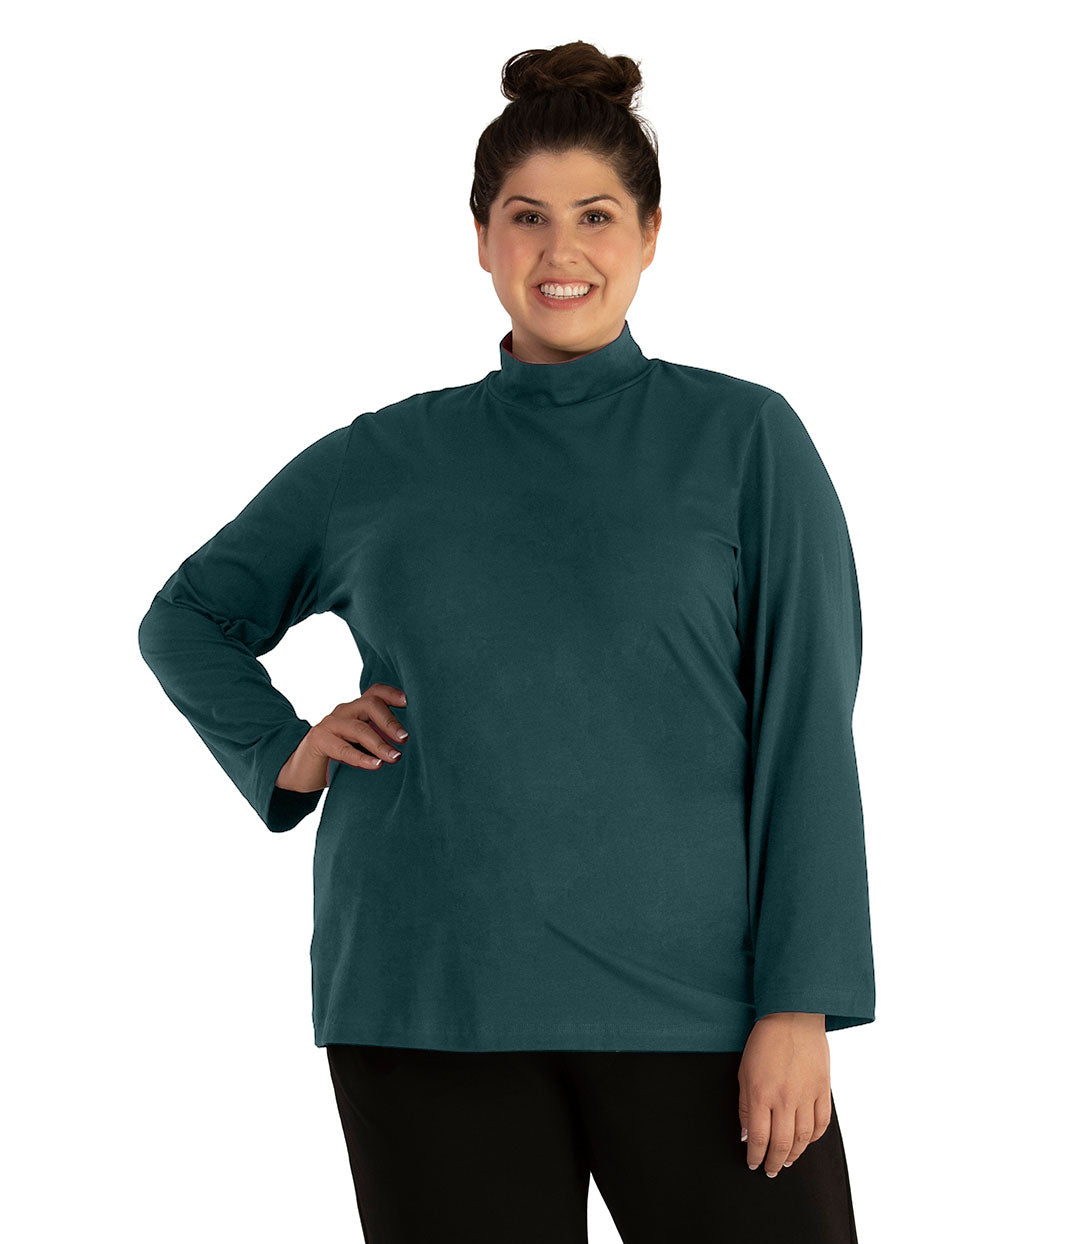 Plus size woman, facing front looking left, wearing JunoActive plus size Stretch Naturals Lite Mock Neck Top in the color Spruce. She is wearing JunoActive Plus Size Leggings in the color Black.